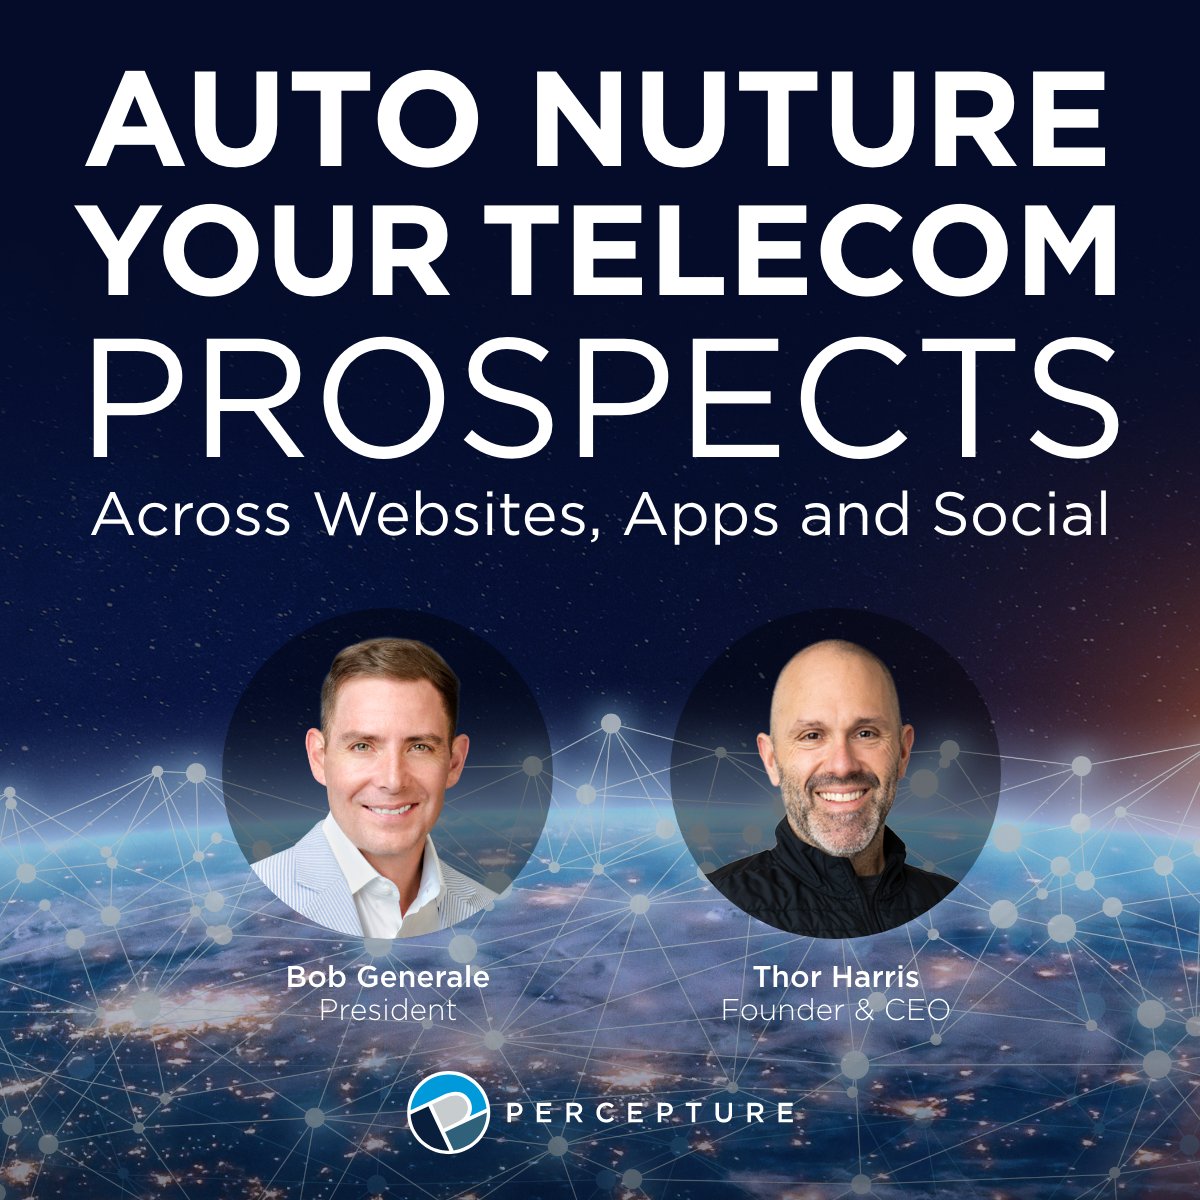 Silence kills deals. Auto Nurture your prospects across websites, apps and social with this business development tool. Connect with President Bob Generale or CEO Thor Harris to start! https://t.co/H6jQvVndFC

#telecom #telecoms #digitalmarketing #leadnurturing #leads https://t.co/0b1QJqCoFS